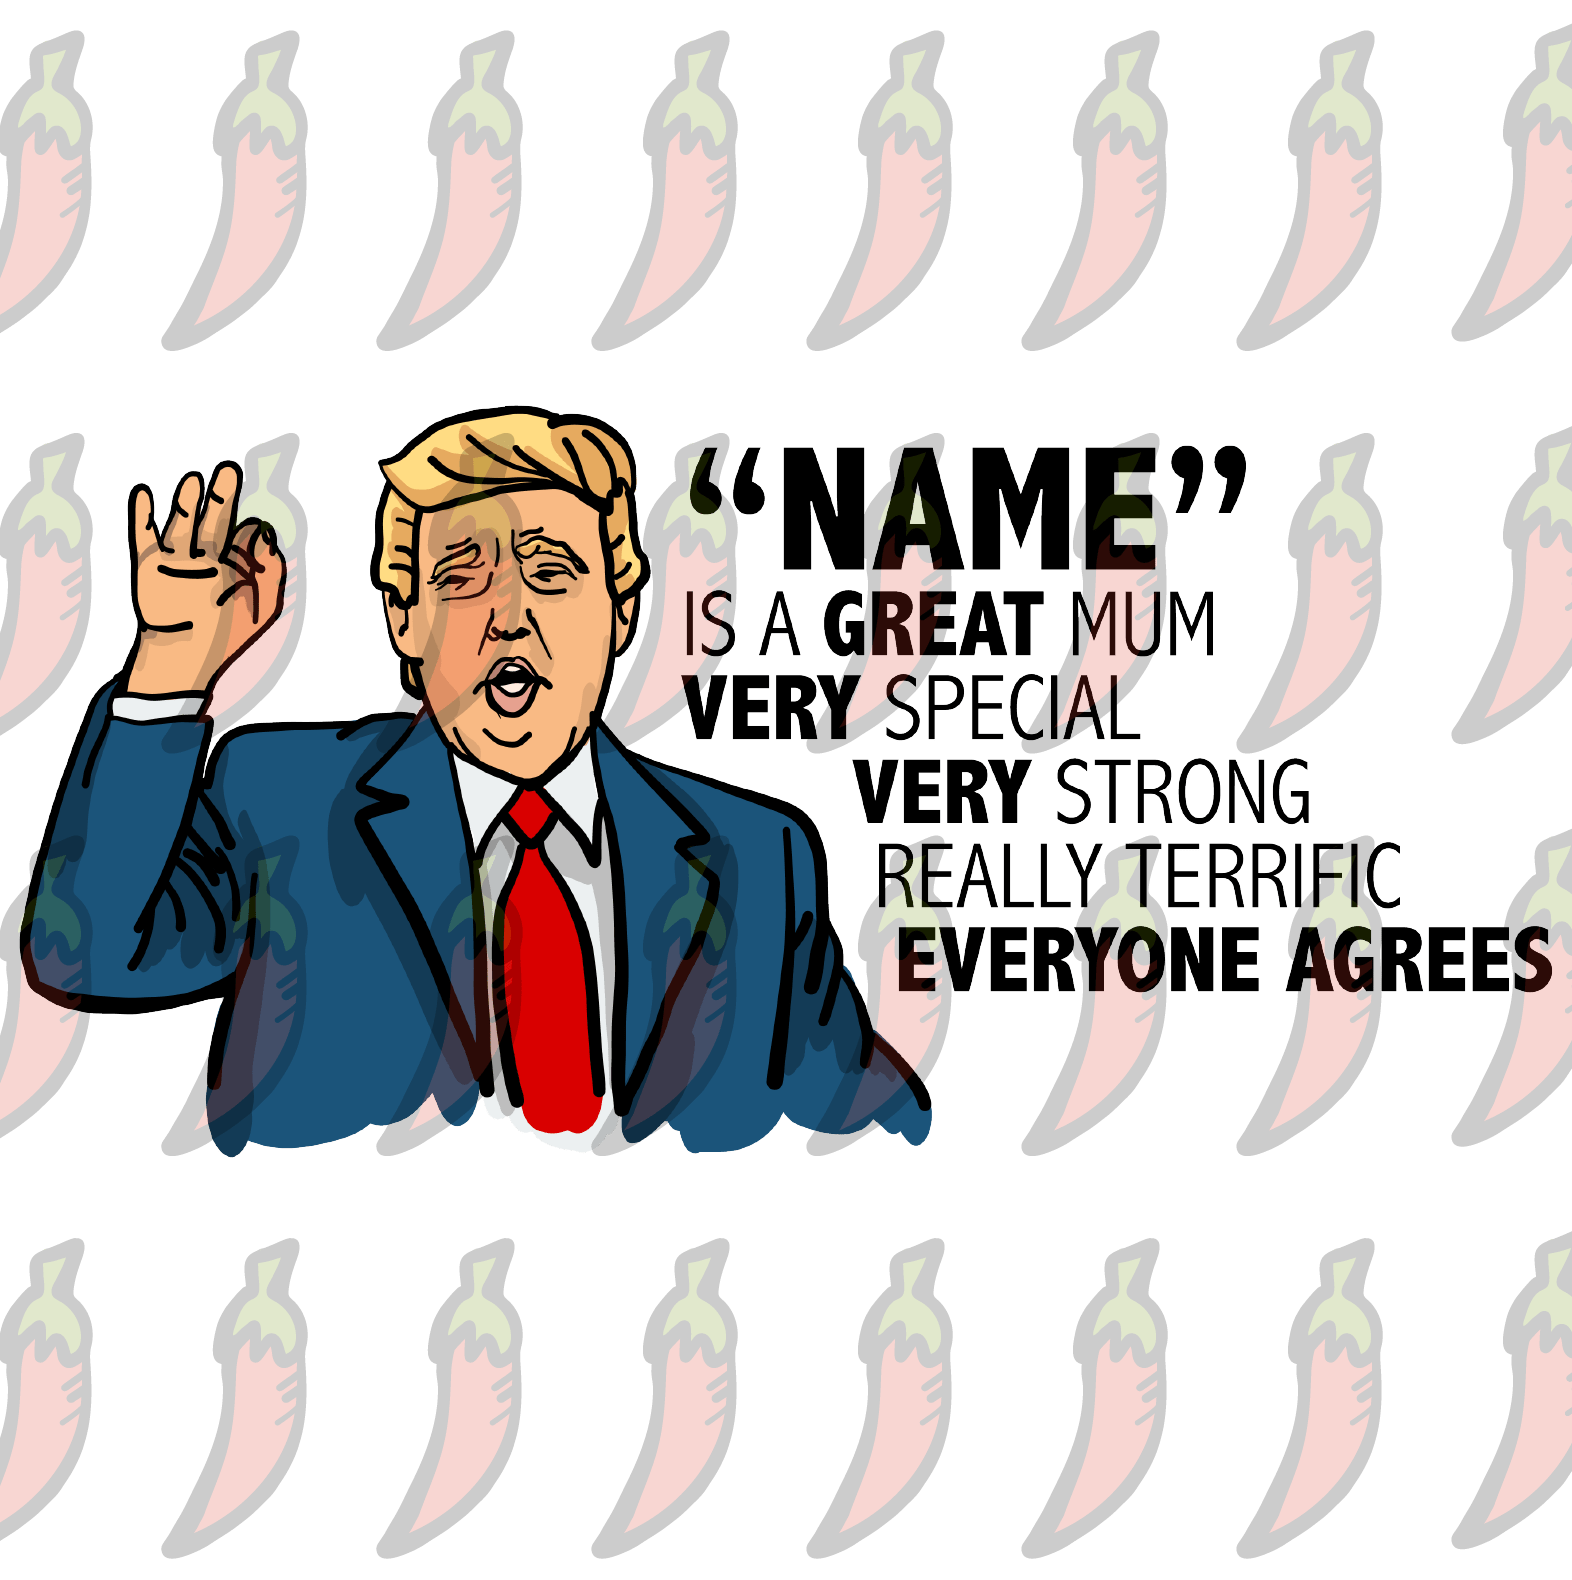 Trump Approves Your Mum 👌 - Personalised Stubby Holder